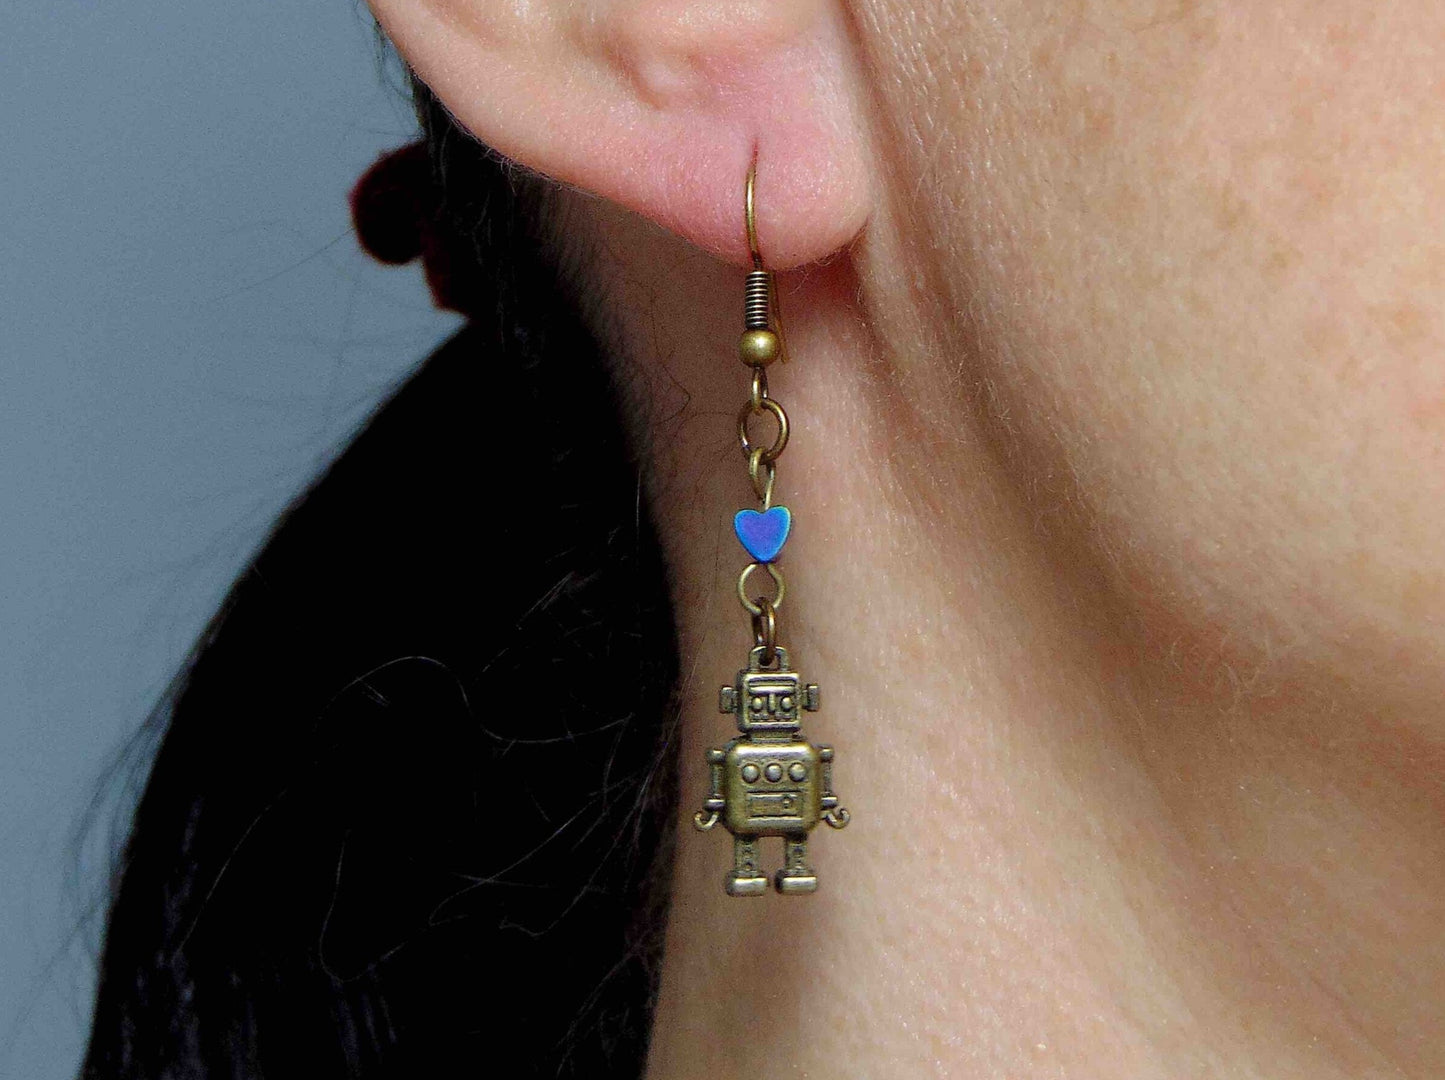 Long earrings with small brass robots and iridescent hematite hearts, brass hooks